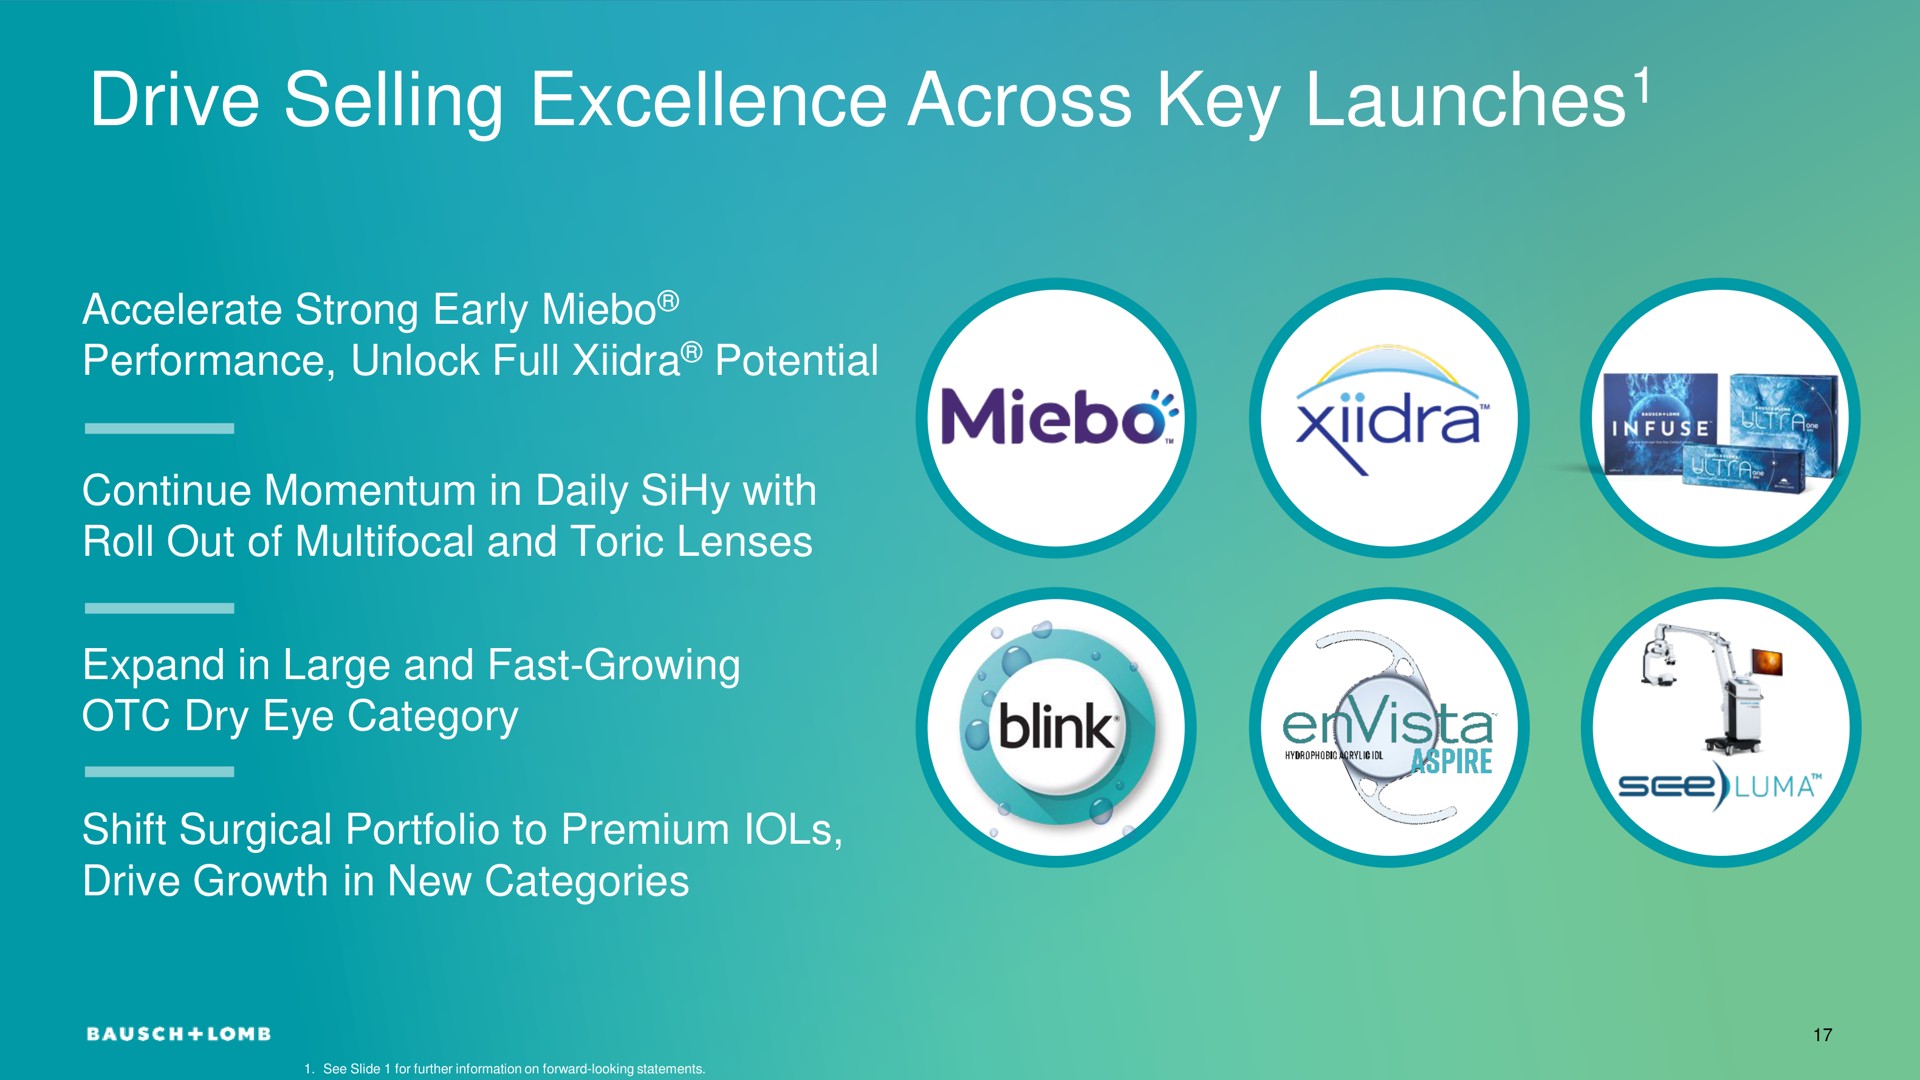 drive selling excellence across key launches launches | Bausch+Lomb